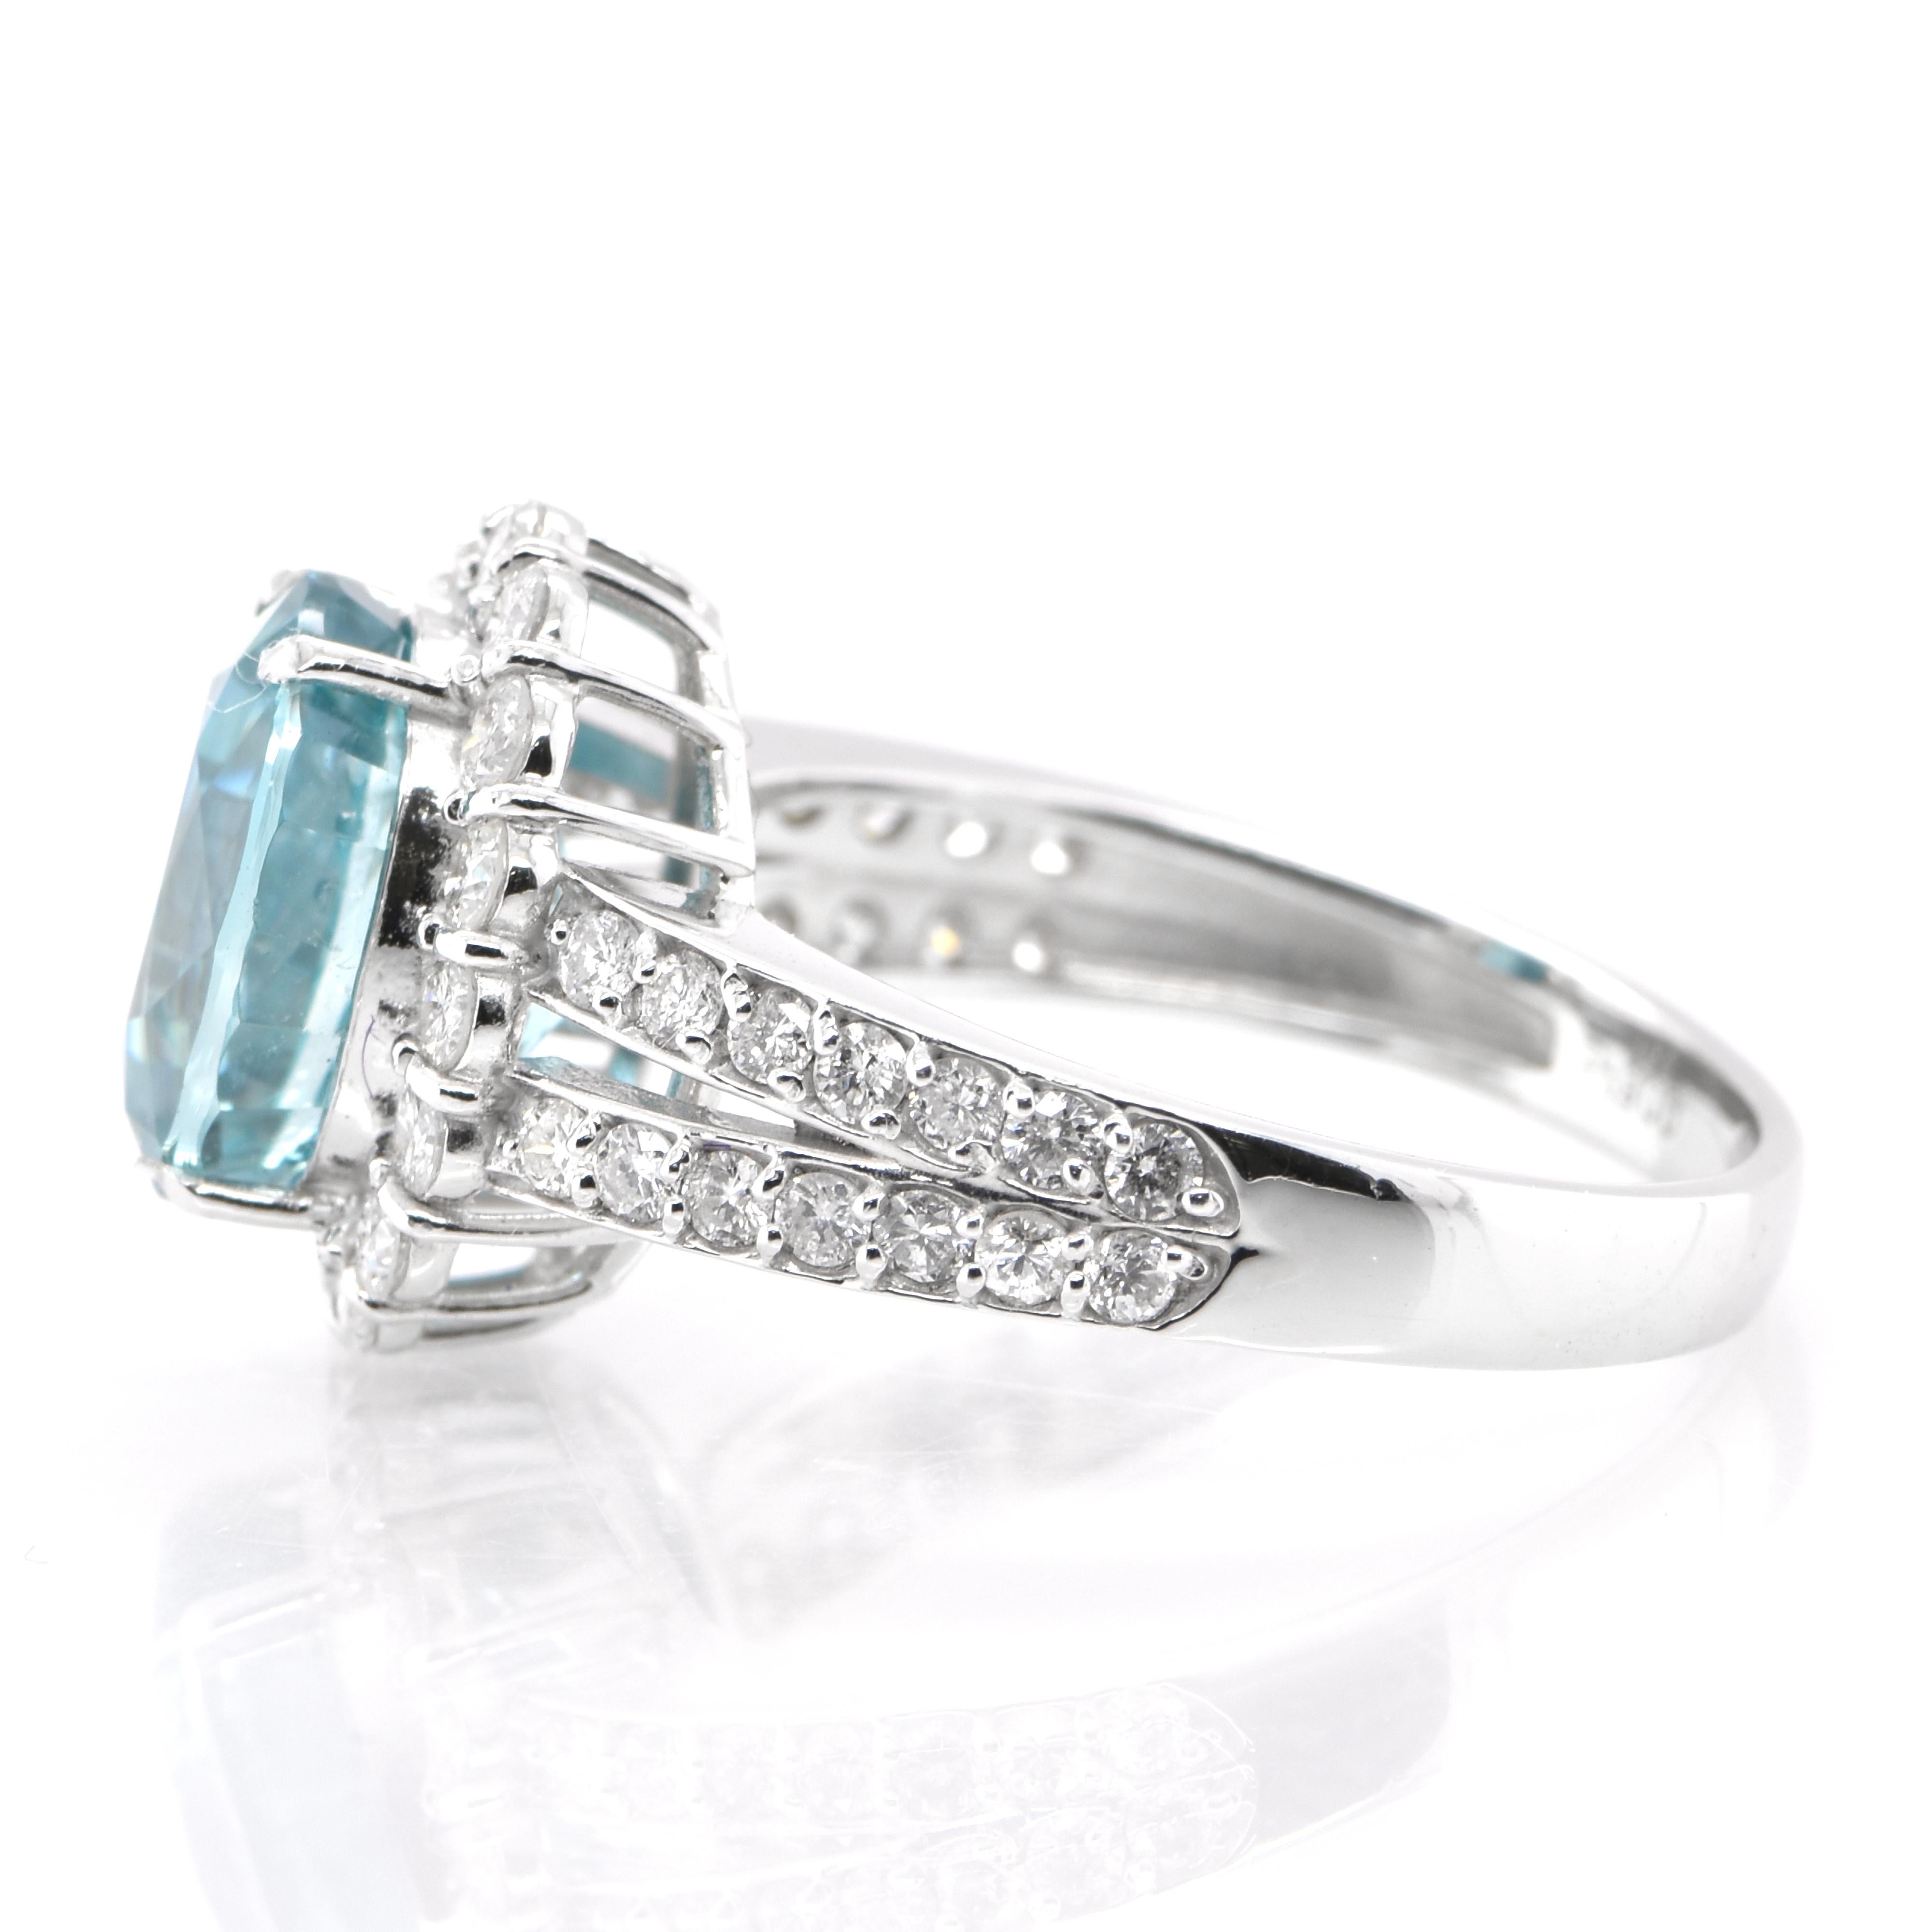 Oval Cut 4.84 Carat Natural Blue Zircon and Diamond Ring Set in Platinum